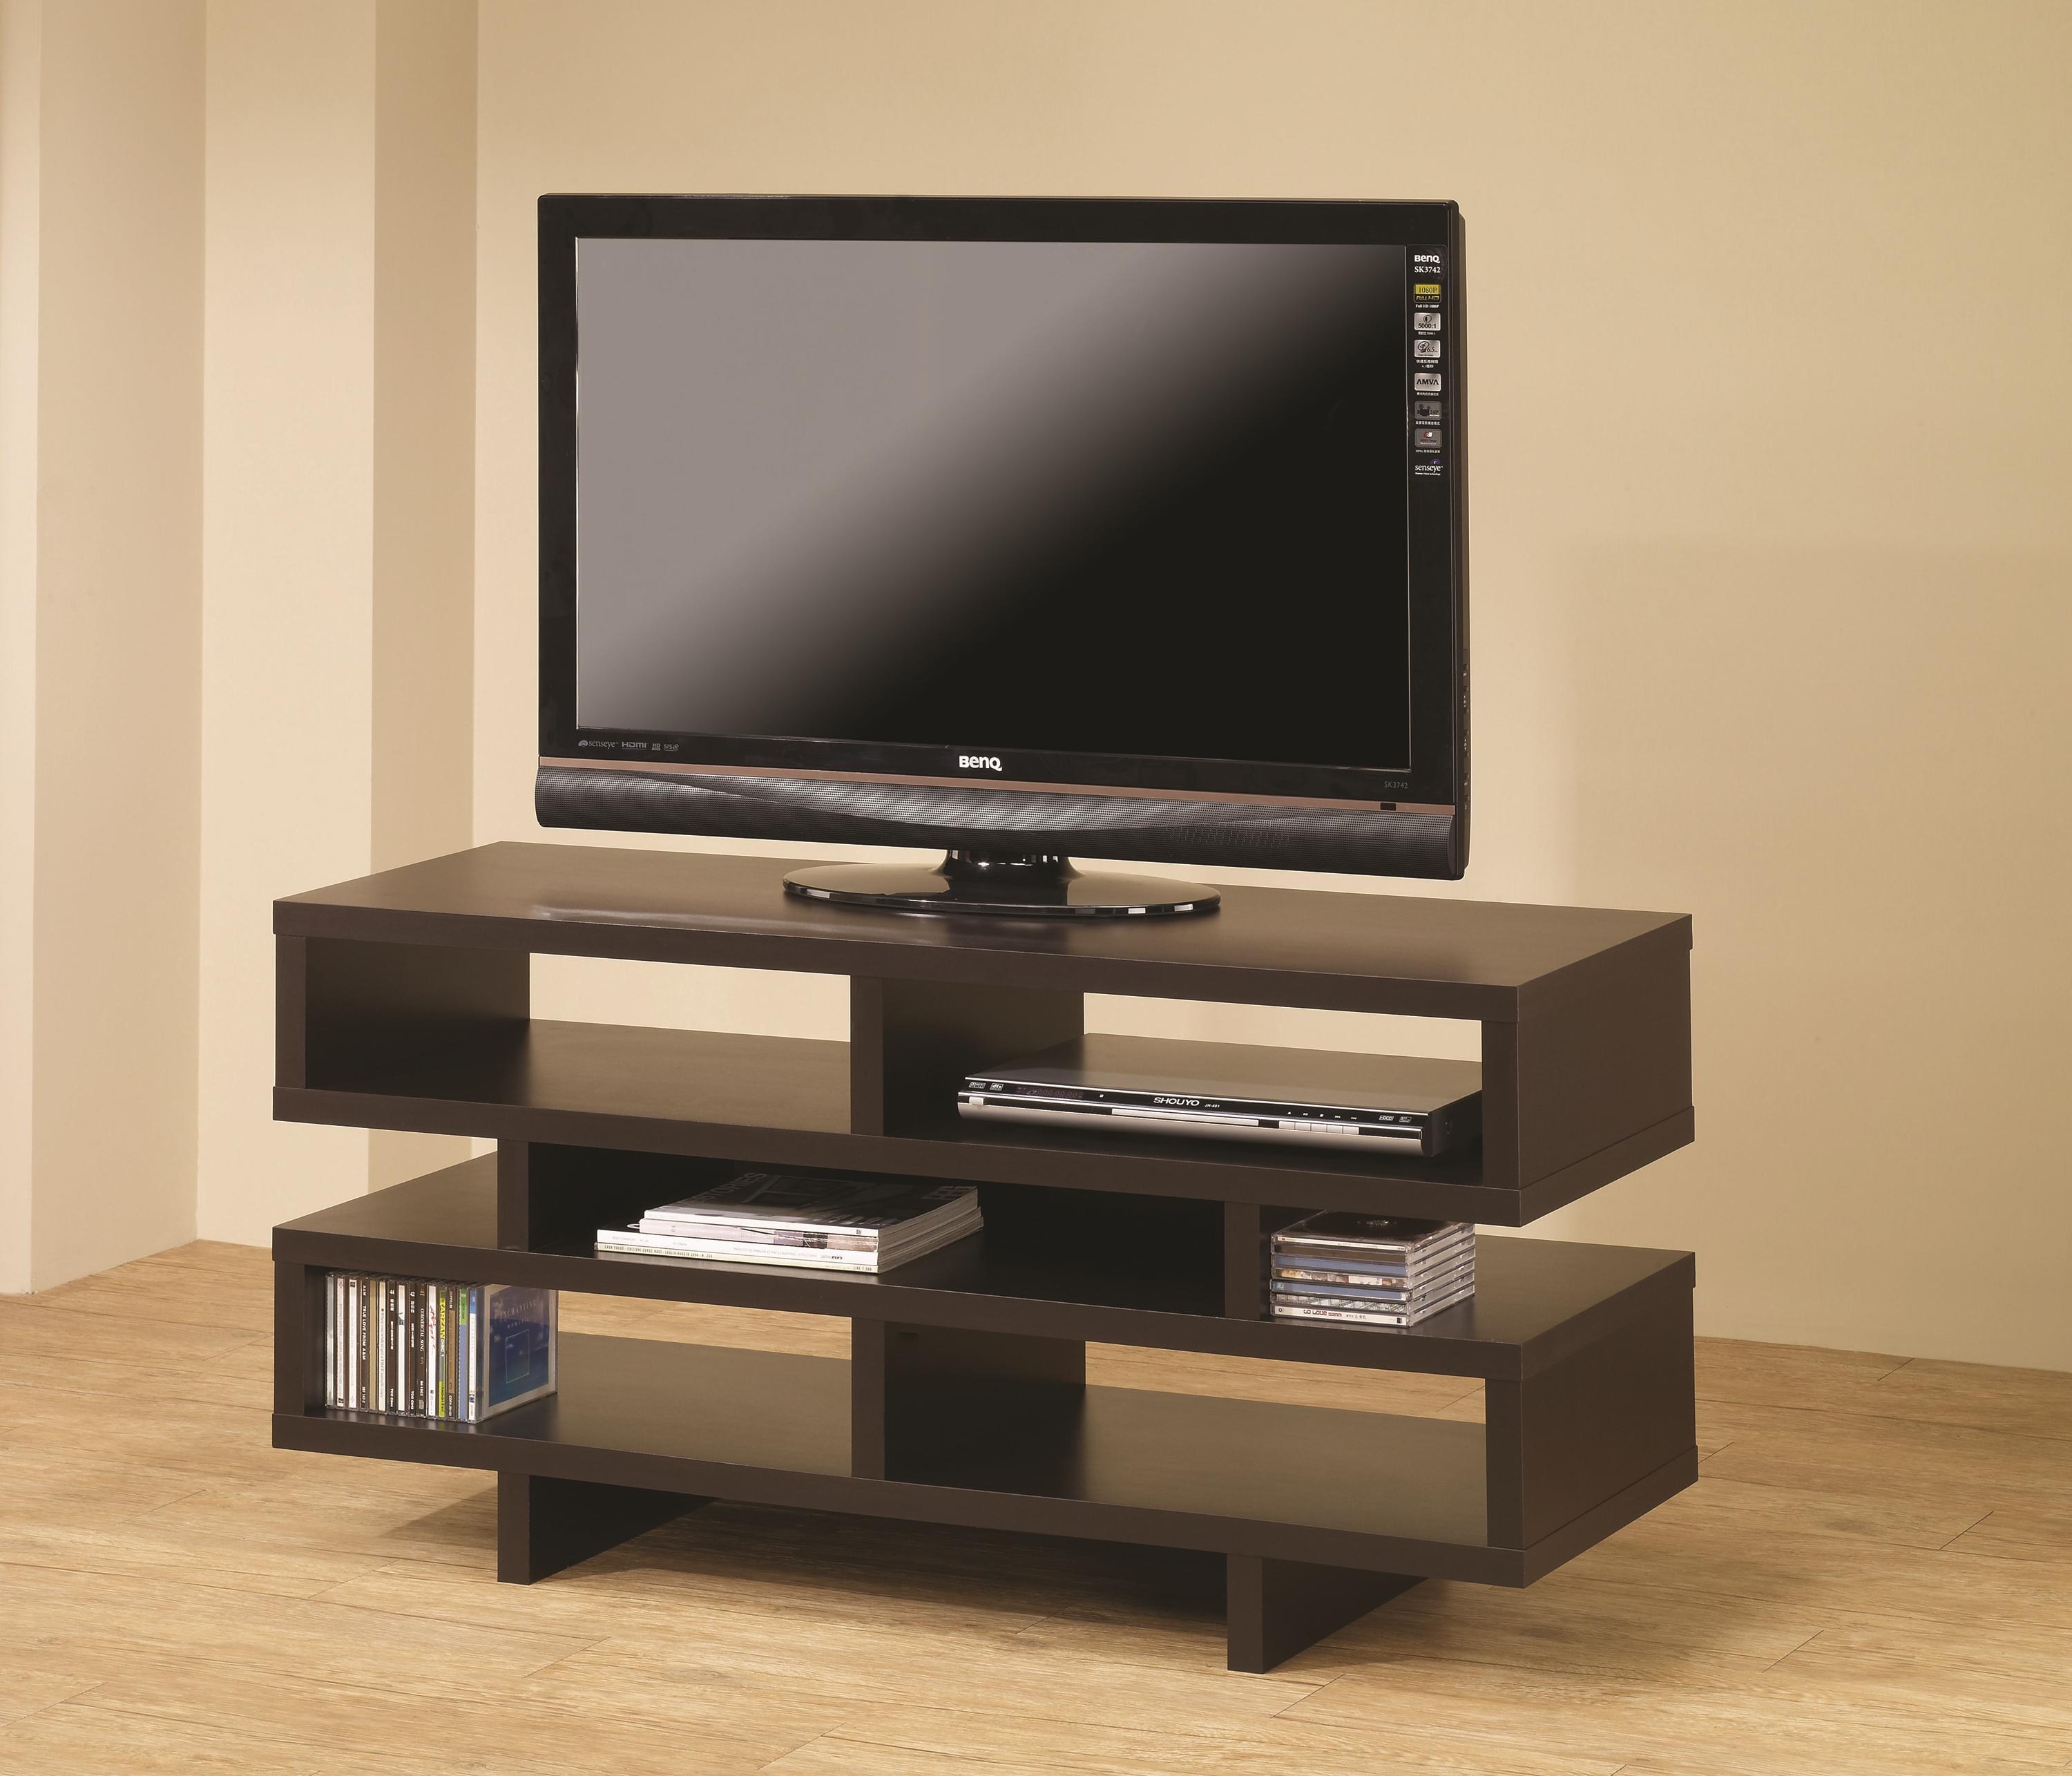 What You Need To Know About Bedroom TV Stands?